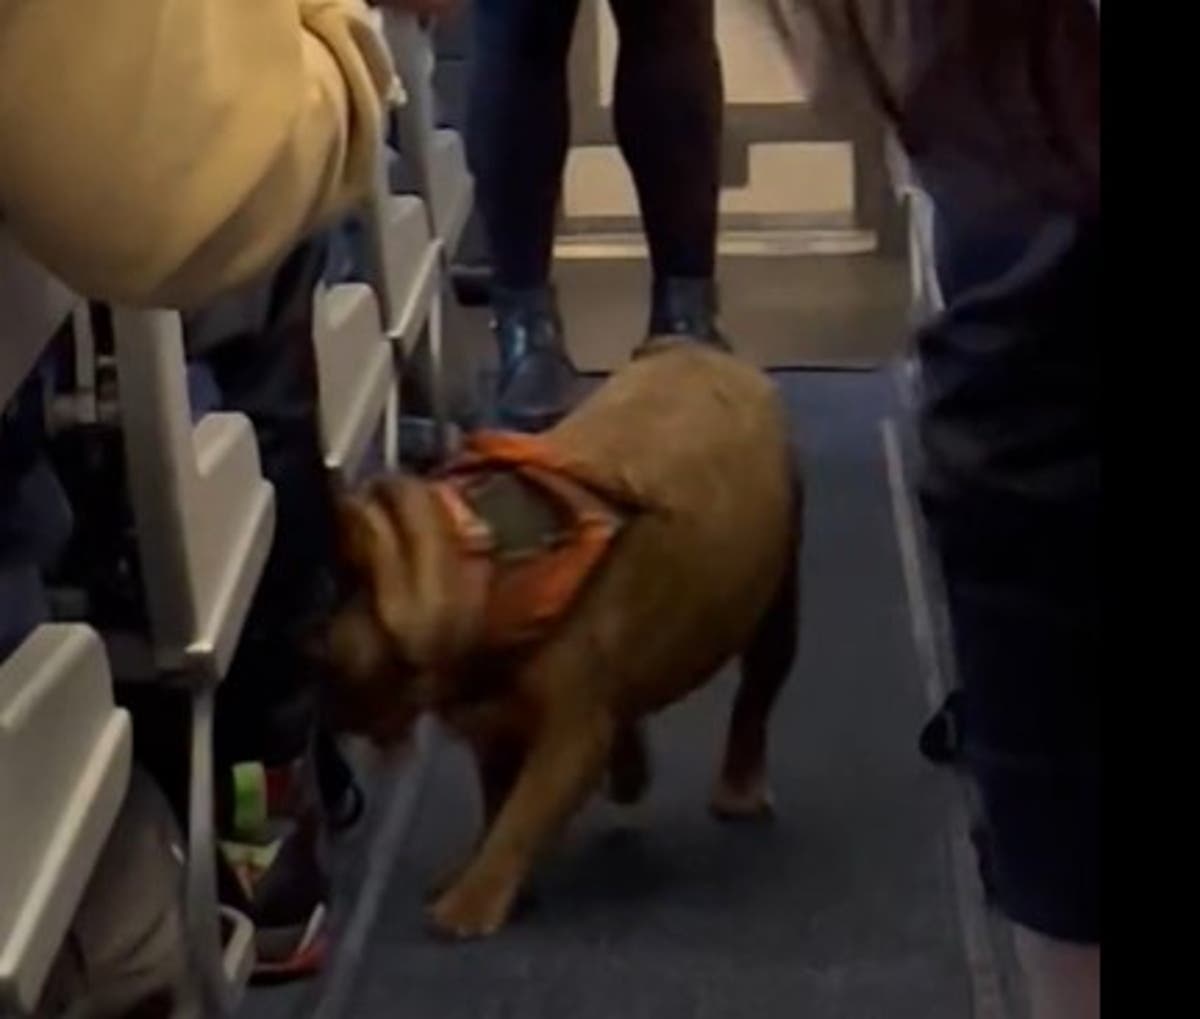 French bulldog escapes travel crate and frolics around plane after owner falls asleep